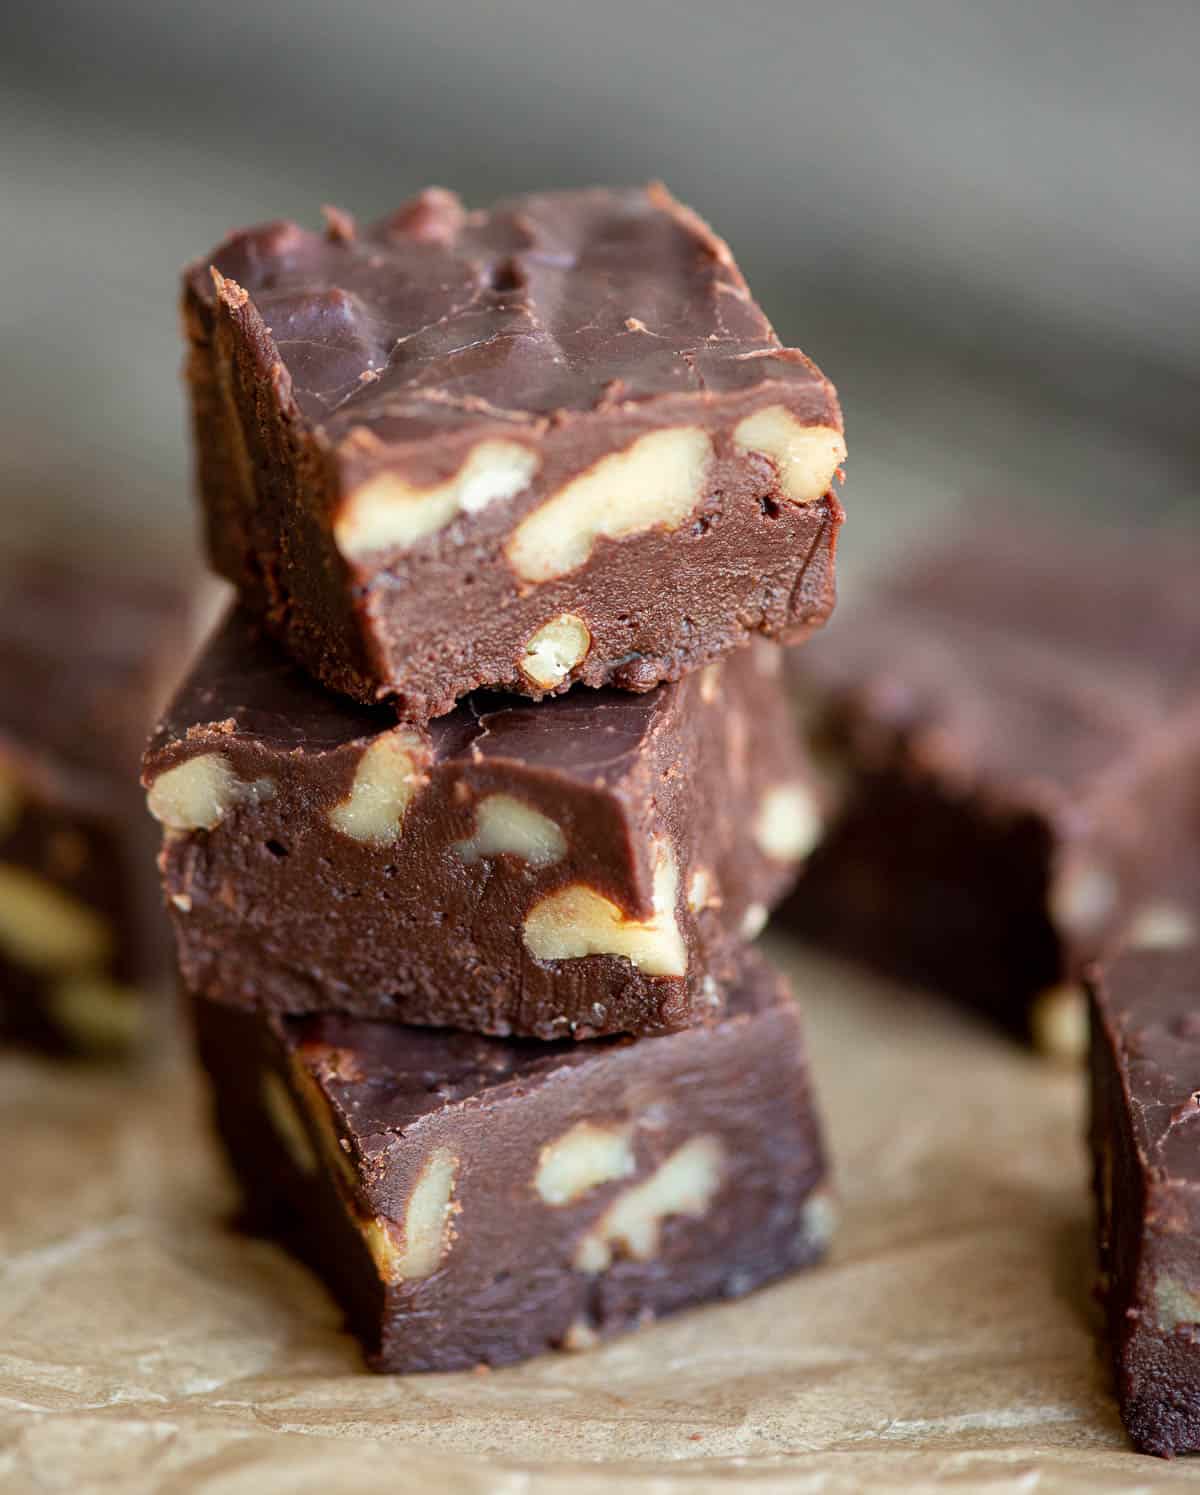 stack of chocolate fudge with walnuts.